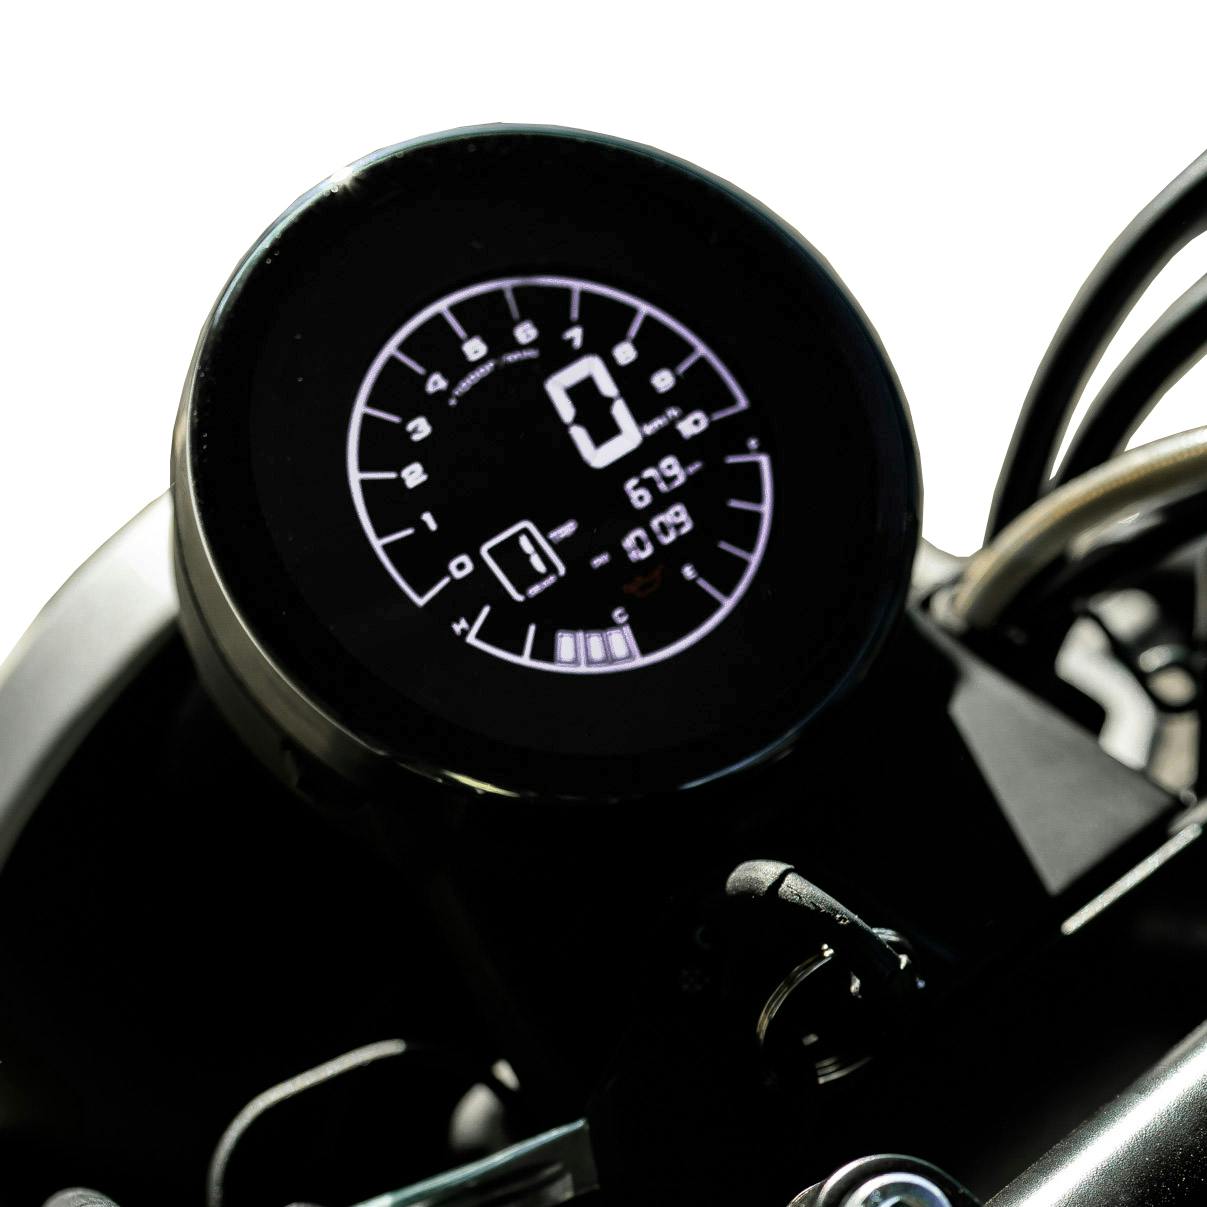 Brixton Crossfire 500 X close-up of the speedometer